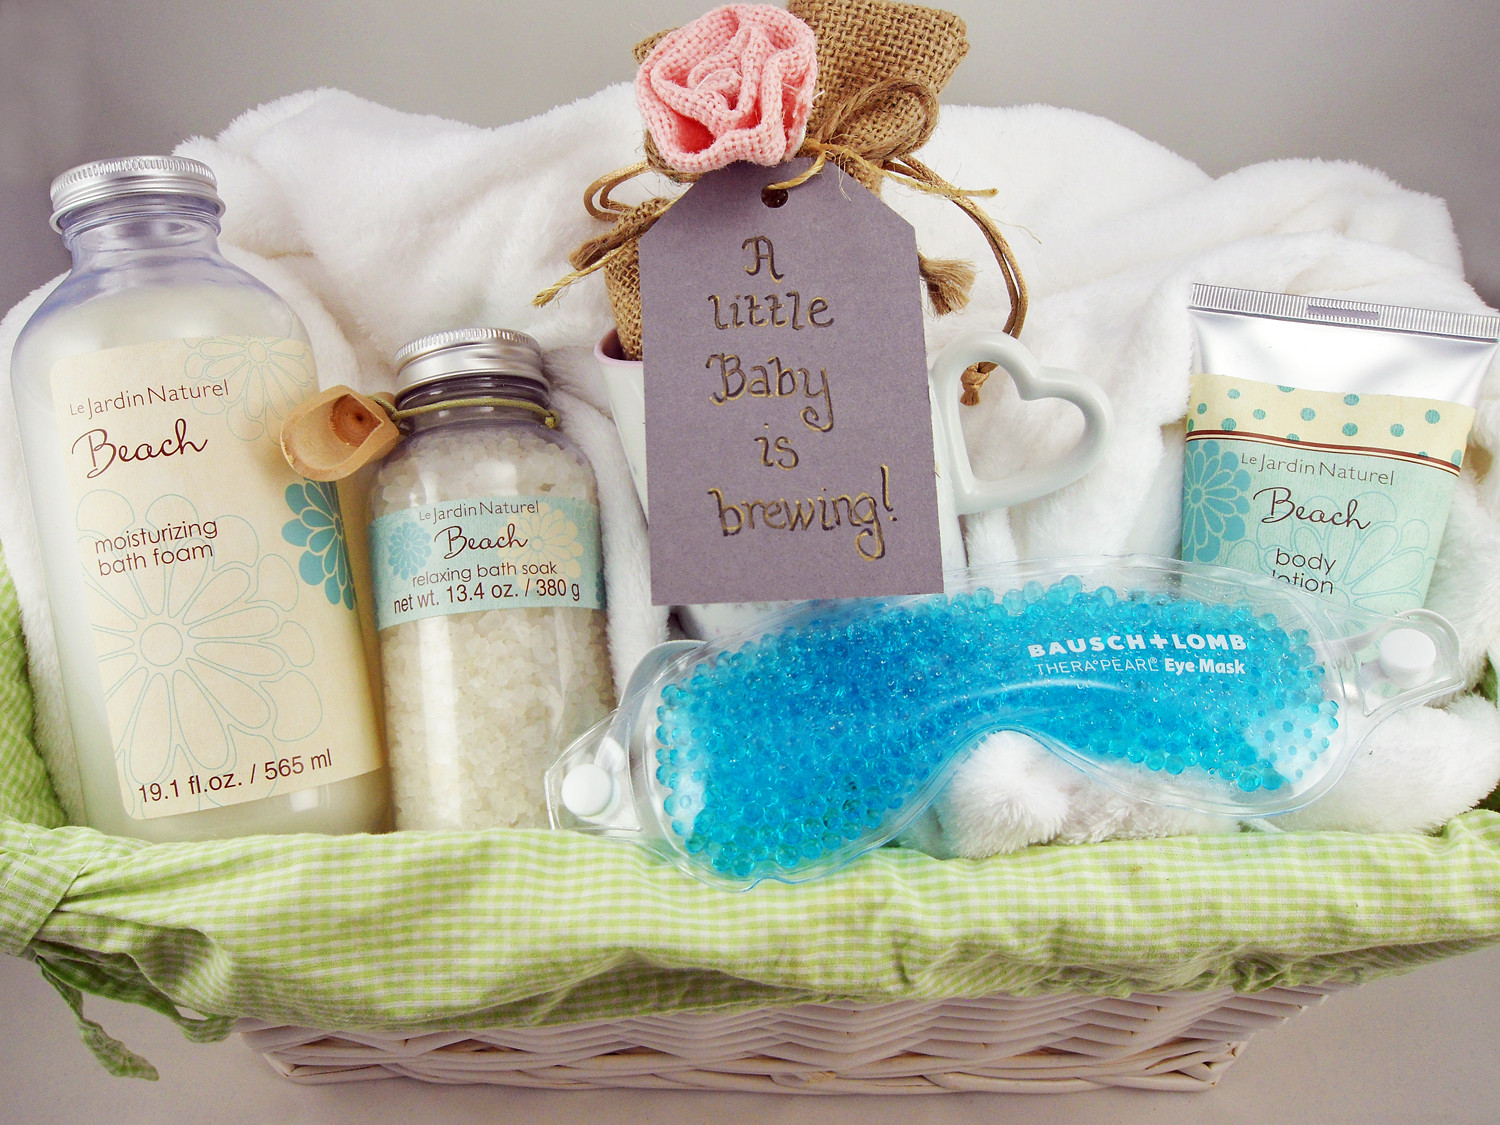 Newborn Baby Gift Baskets Ideas
 Expecting Couples Love These Unique Personalized Baby Gifts